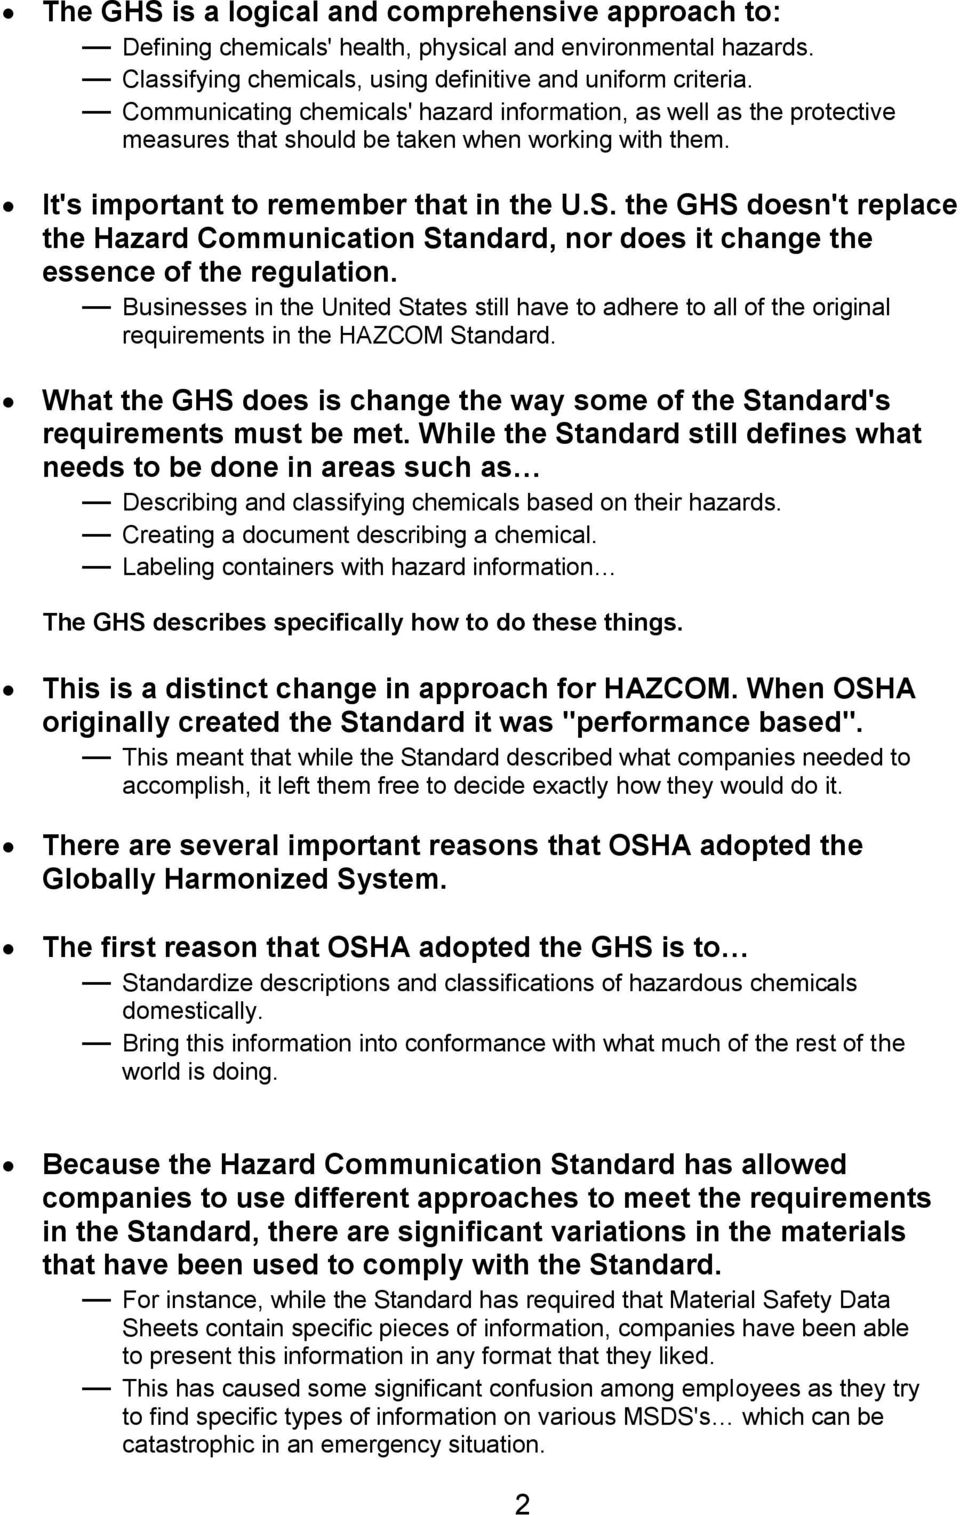 the GHS doesn't replace the Hazard Communication Standard, nor does it change the essence of the regulation.